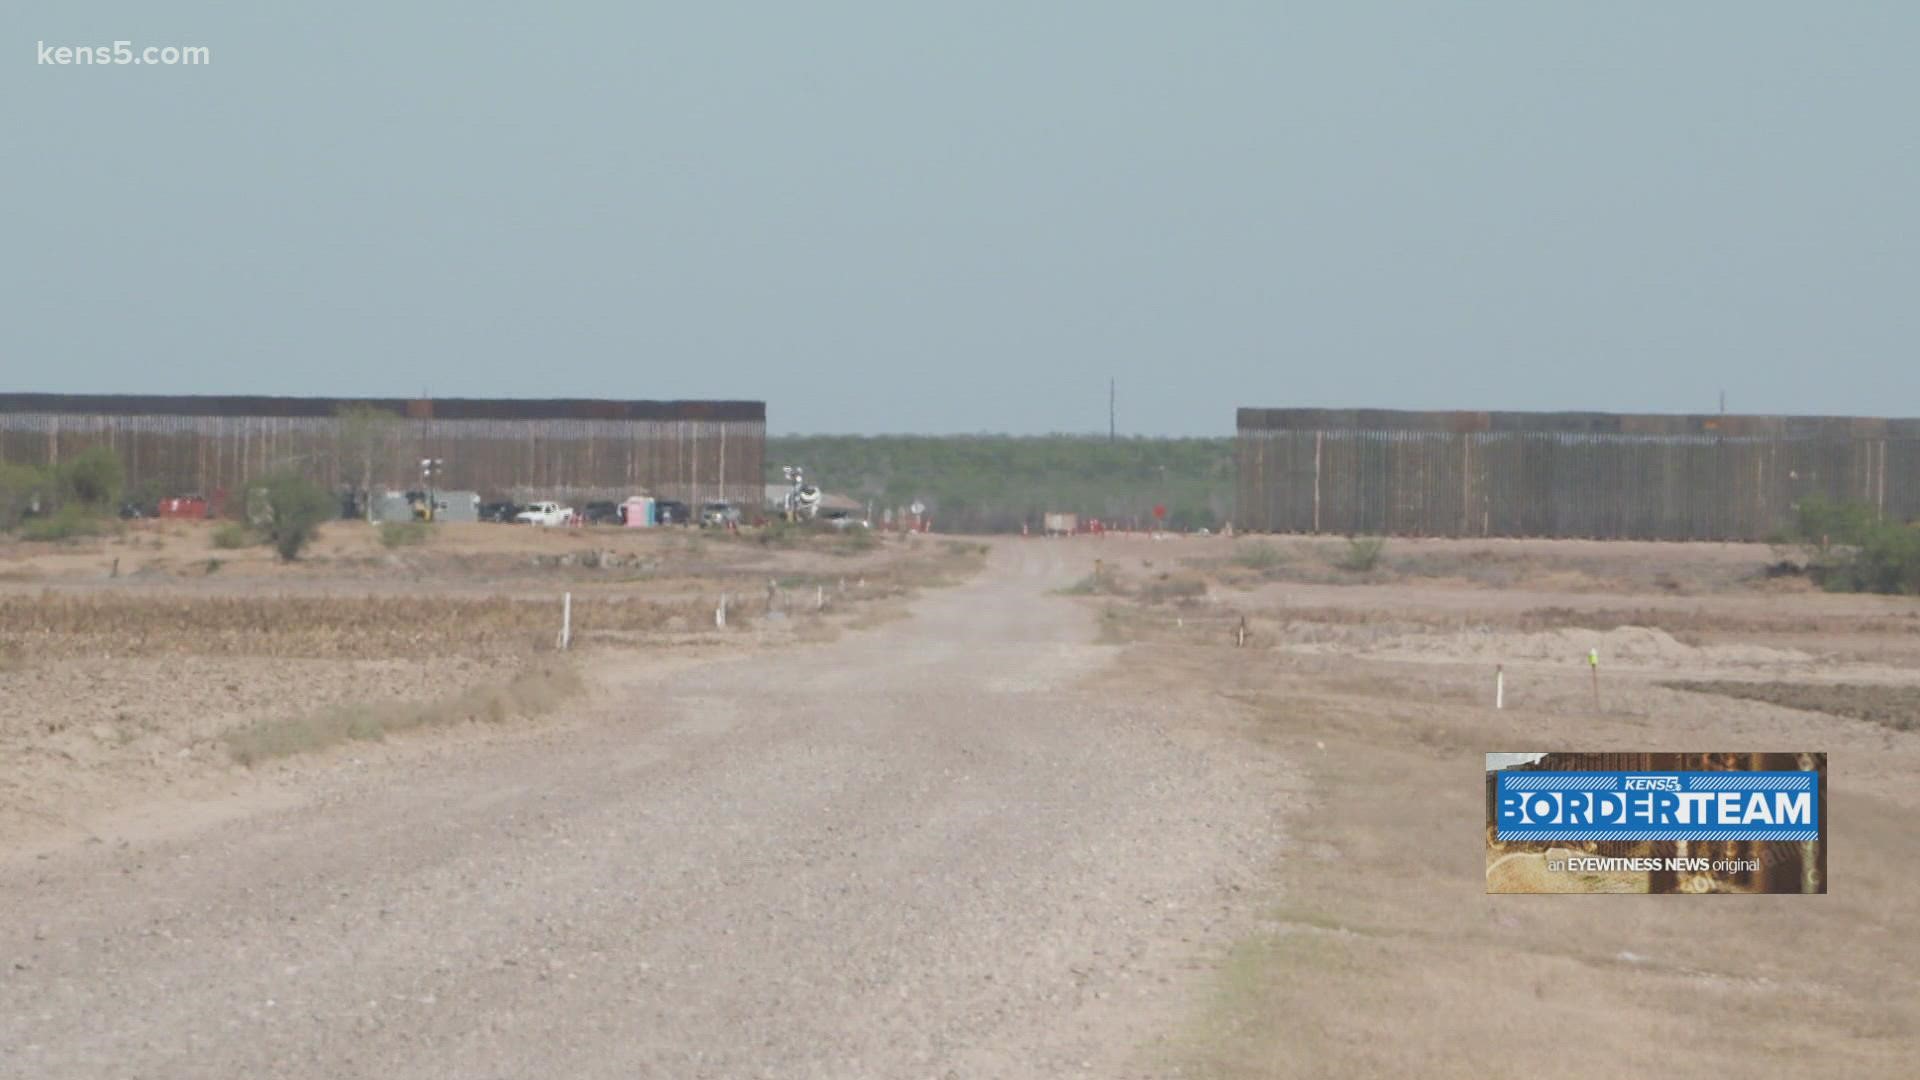 As Gov. Greg Abbott’s re-election campaign gains steam, border wall construction continues.